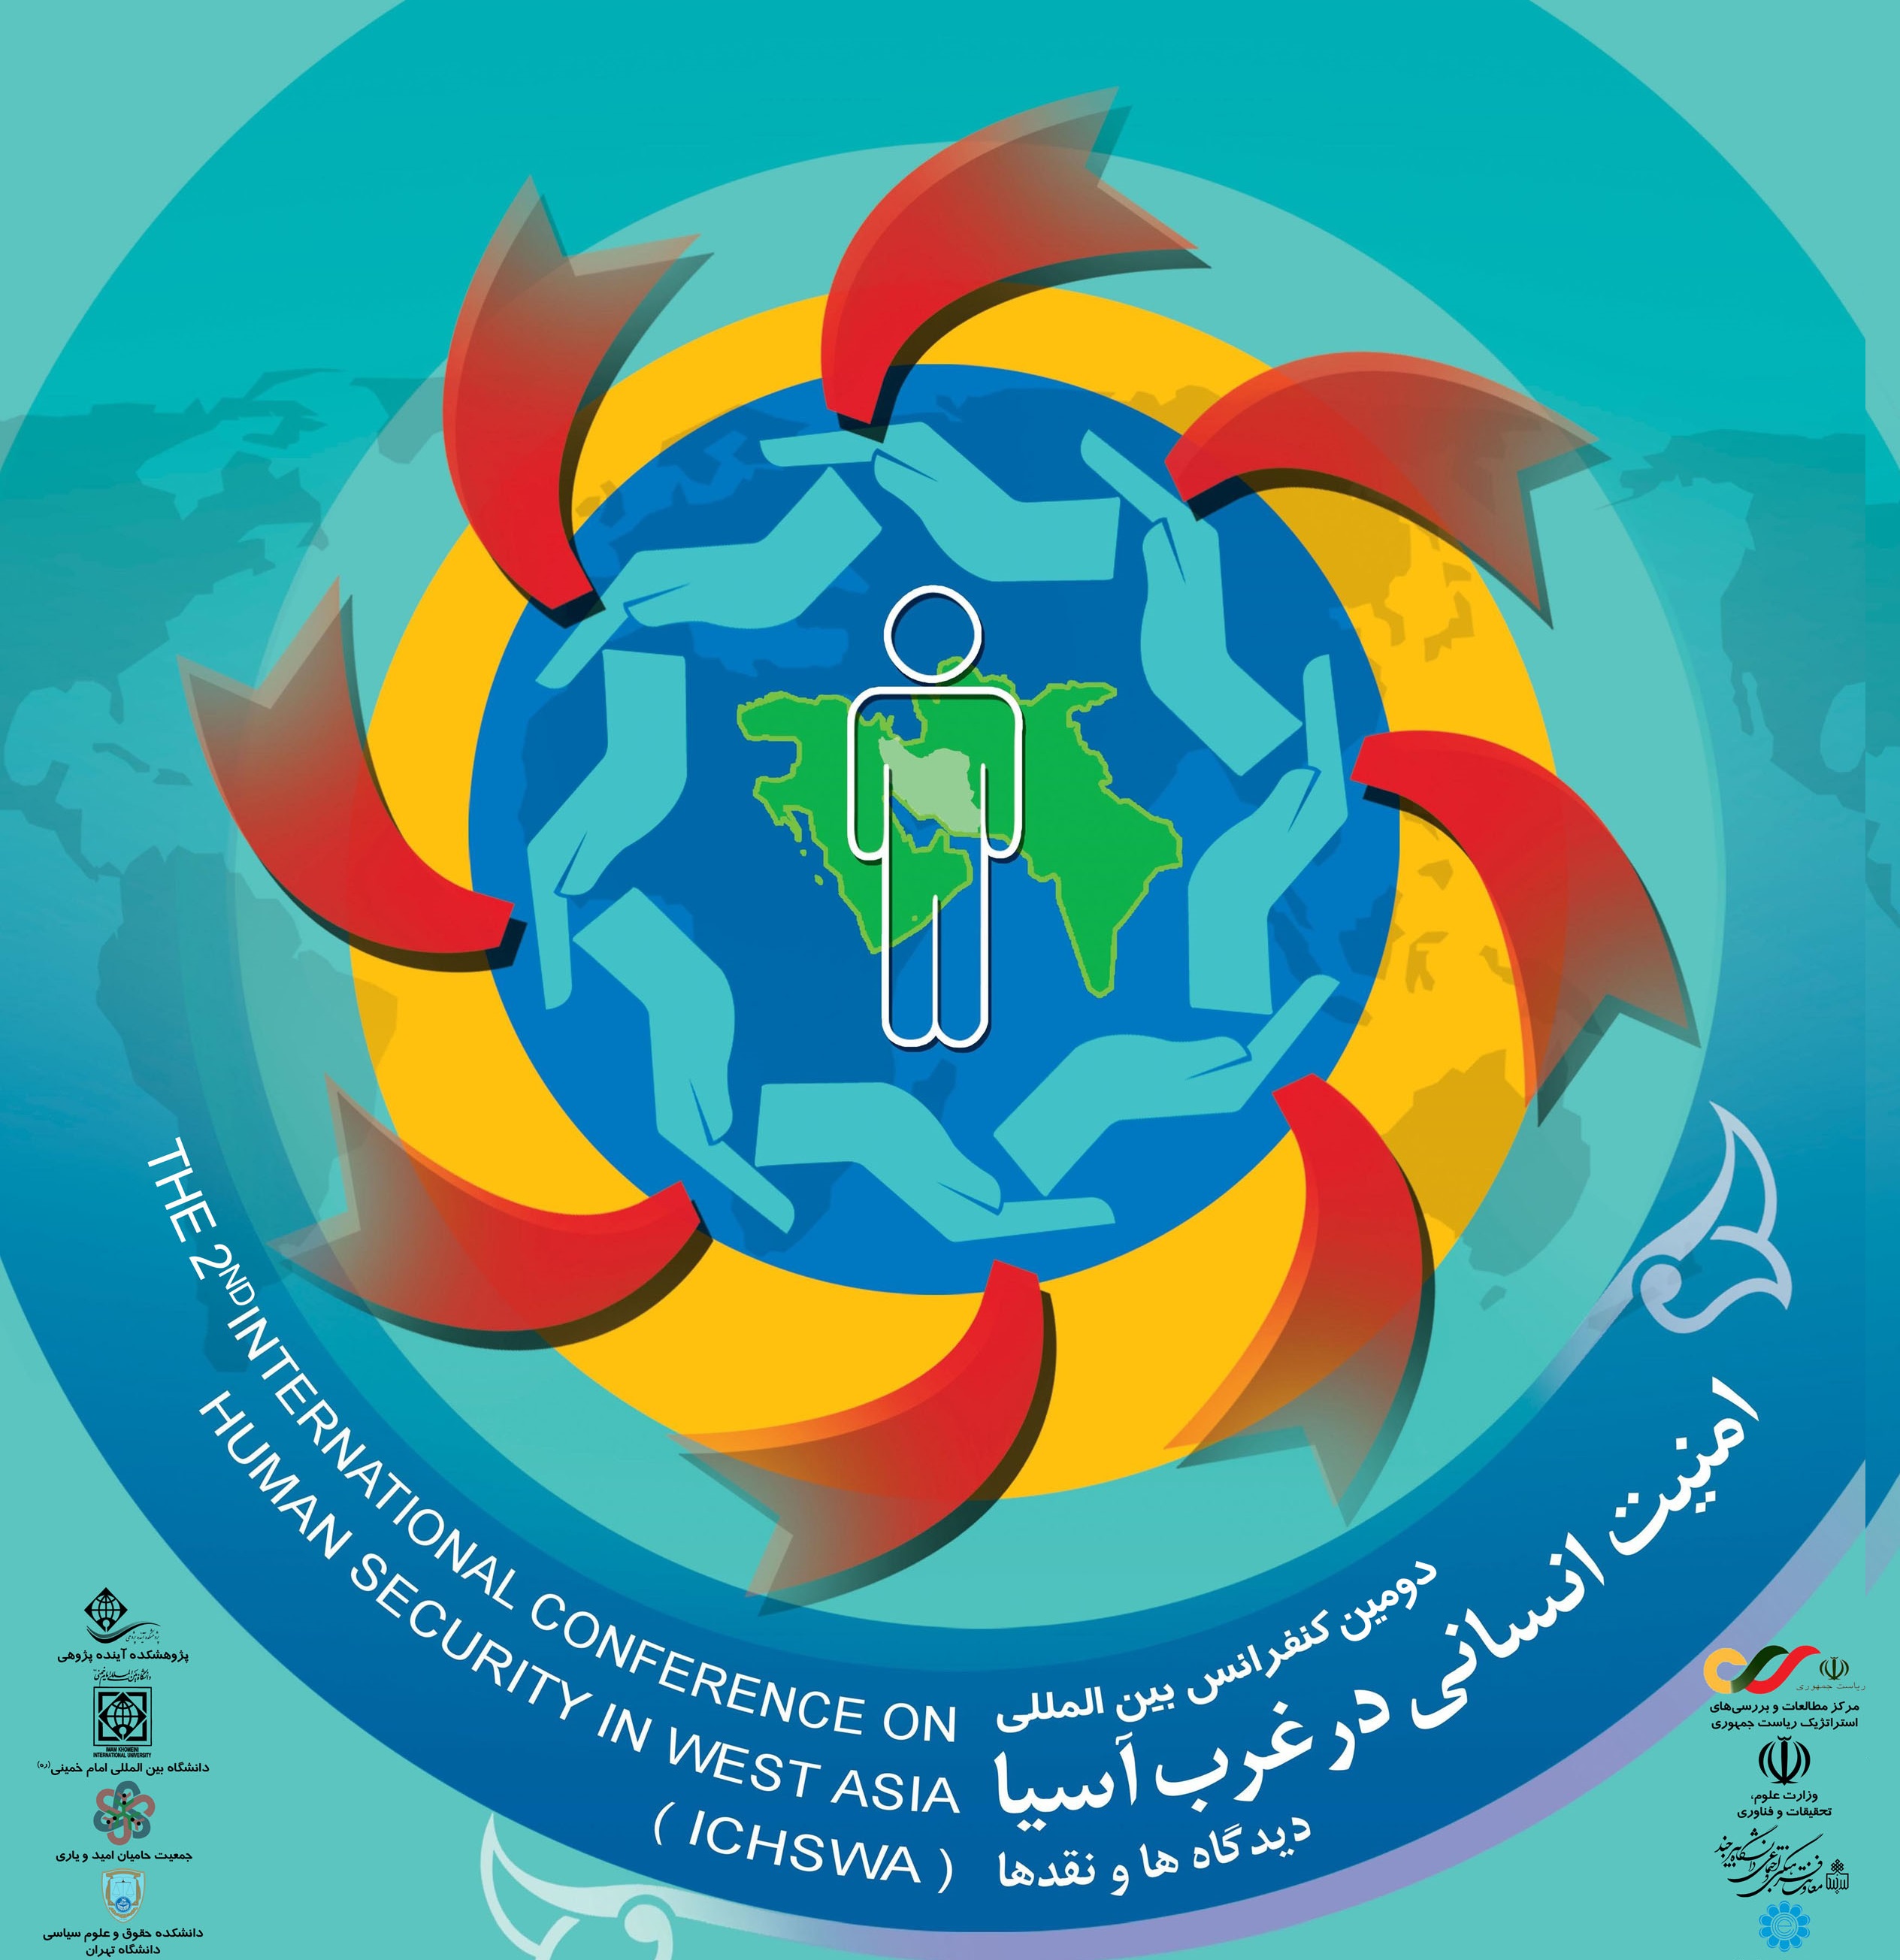 The second International Conference on Human Security in West Asia